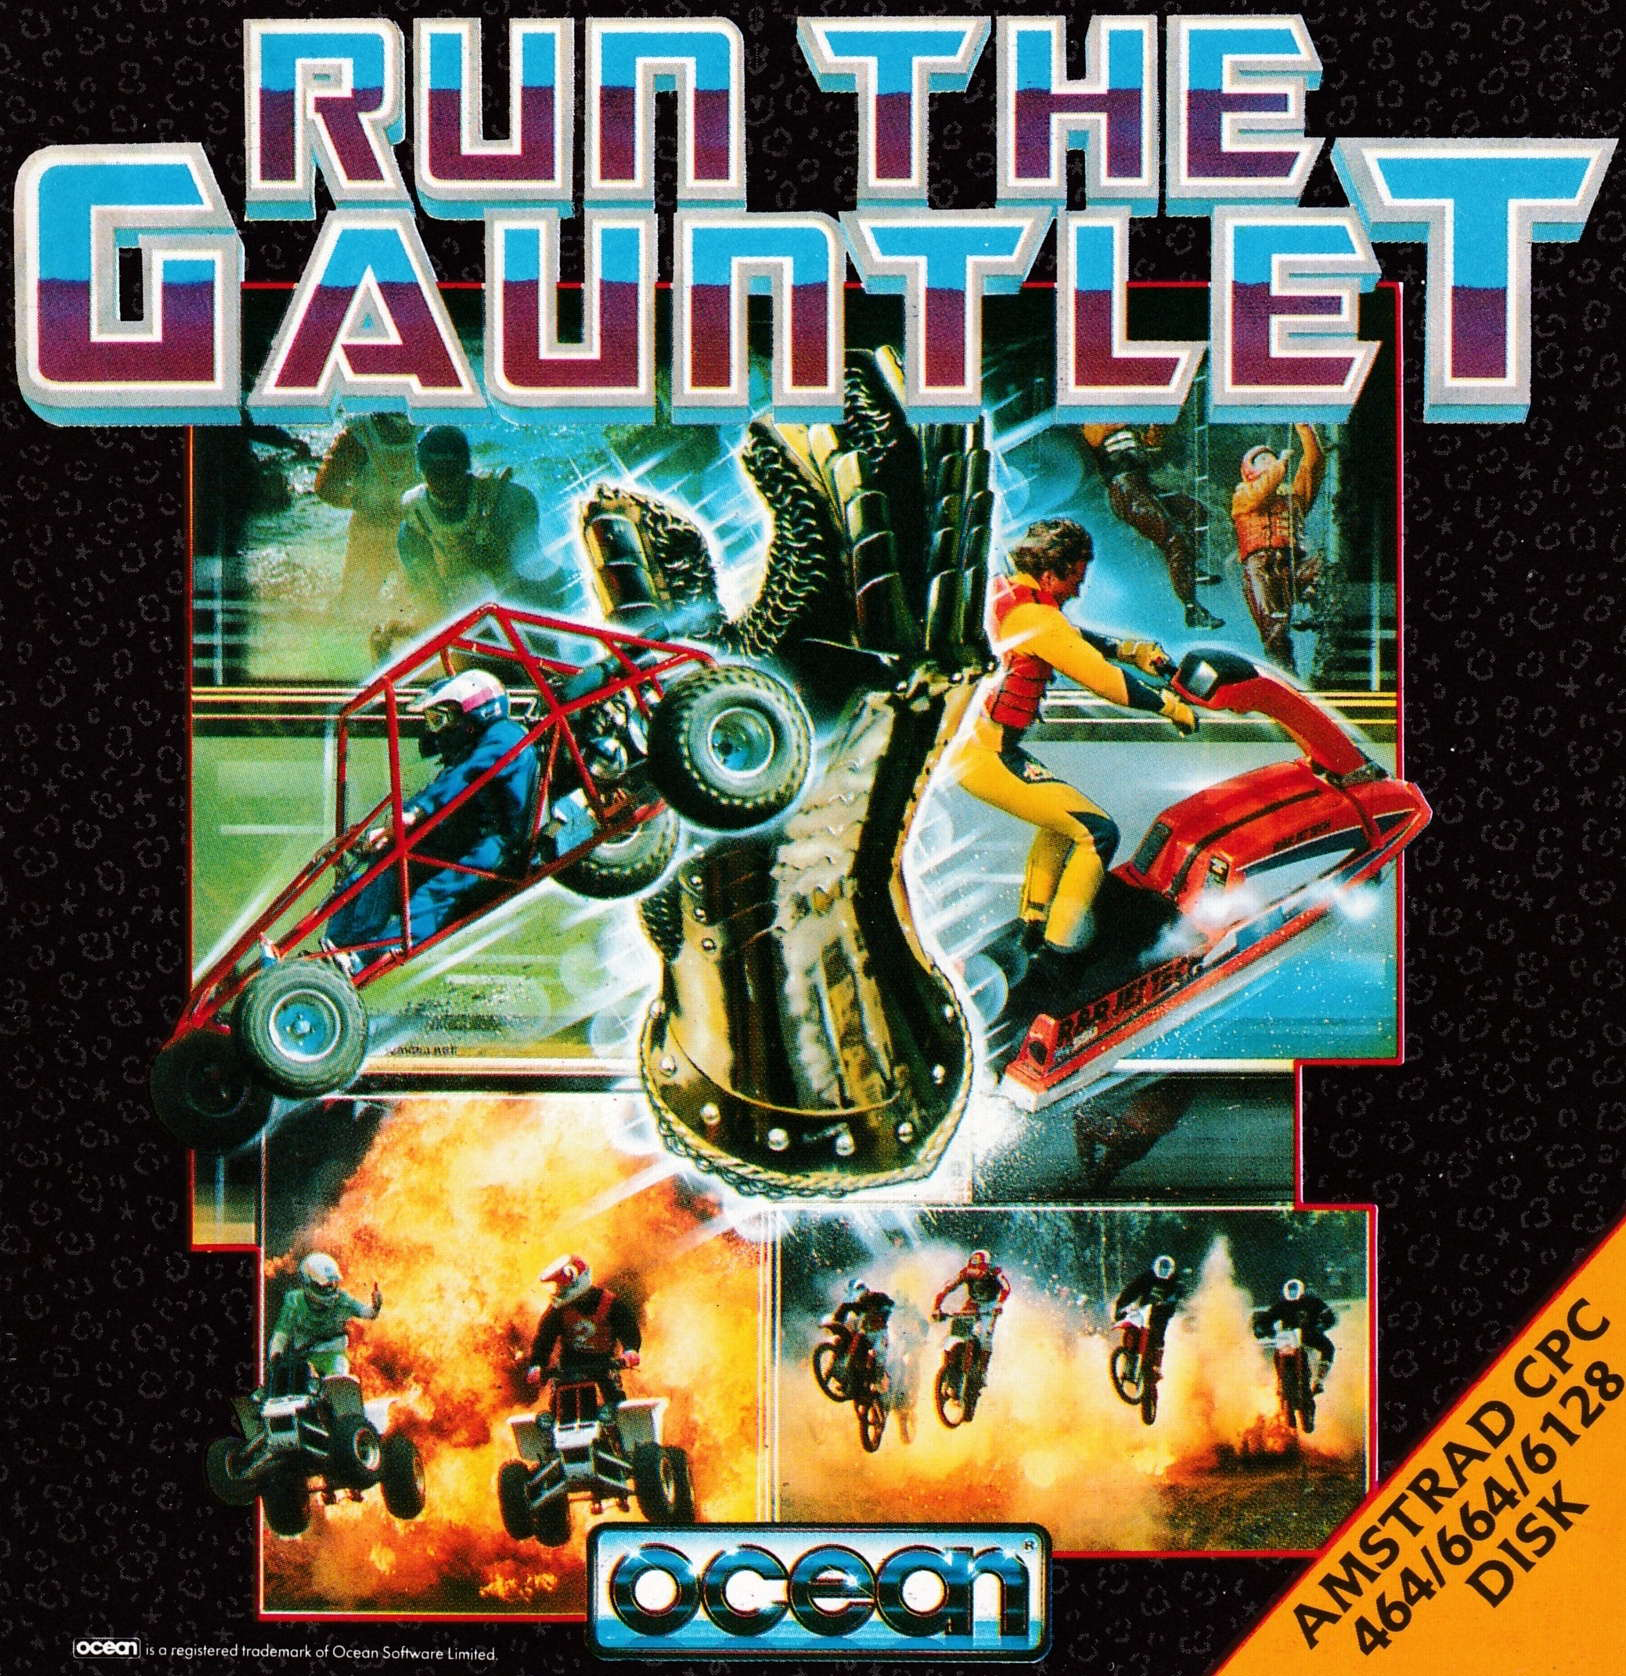 screenshot of the Amstrad CPC game Run the gauntlet by GameBase CPC